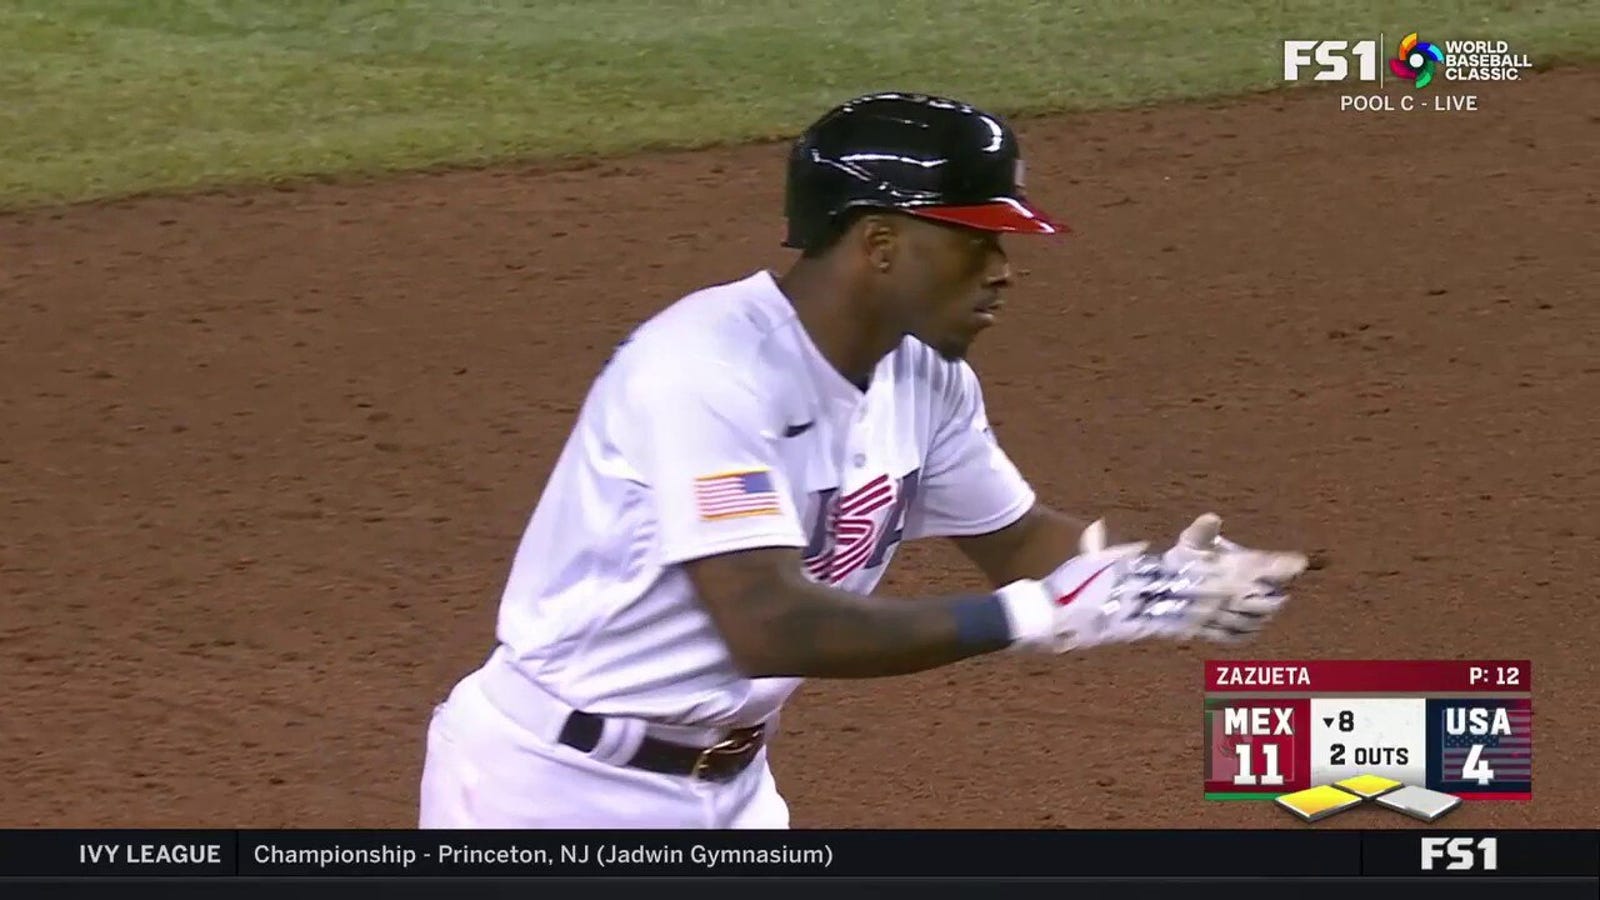 Tim Anderson sparks a potential USA comeback against Mexico with an RBI double